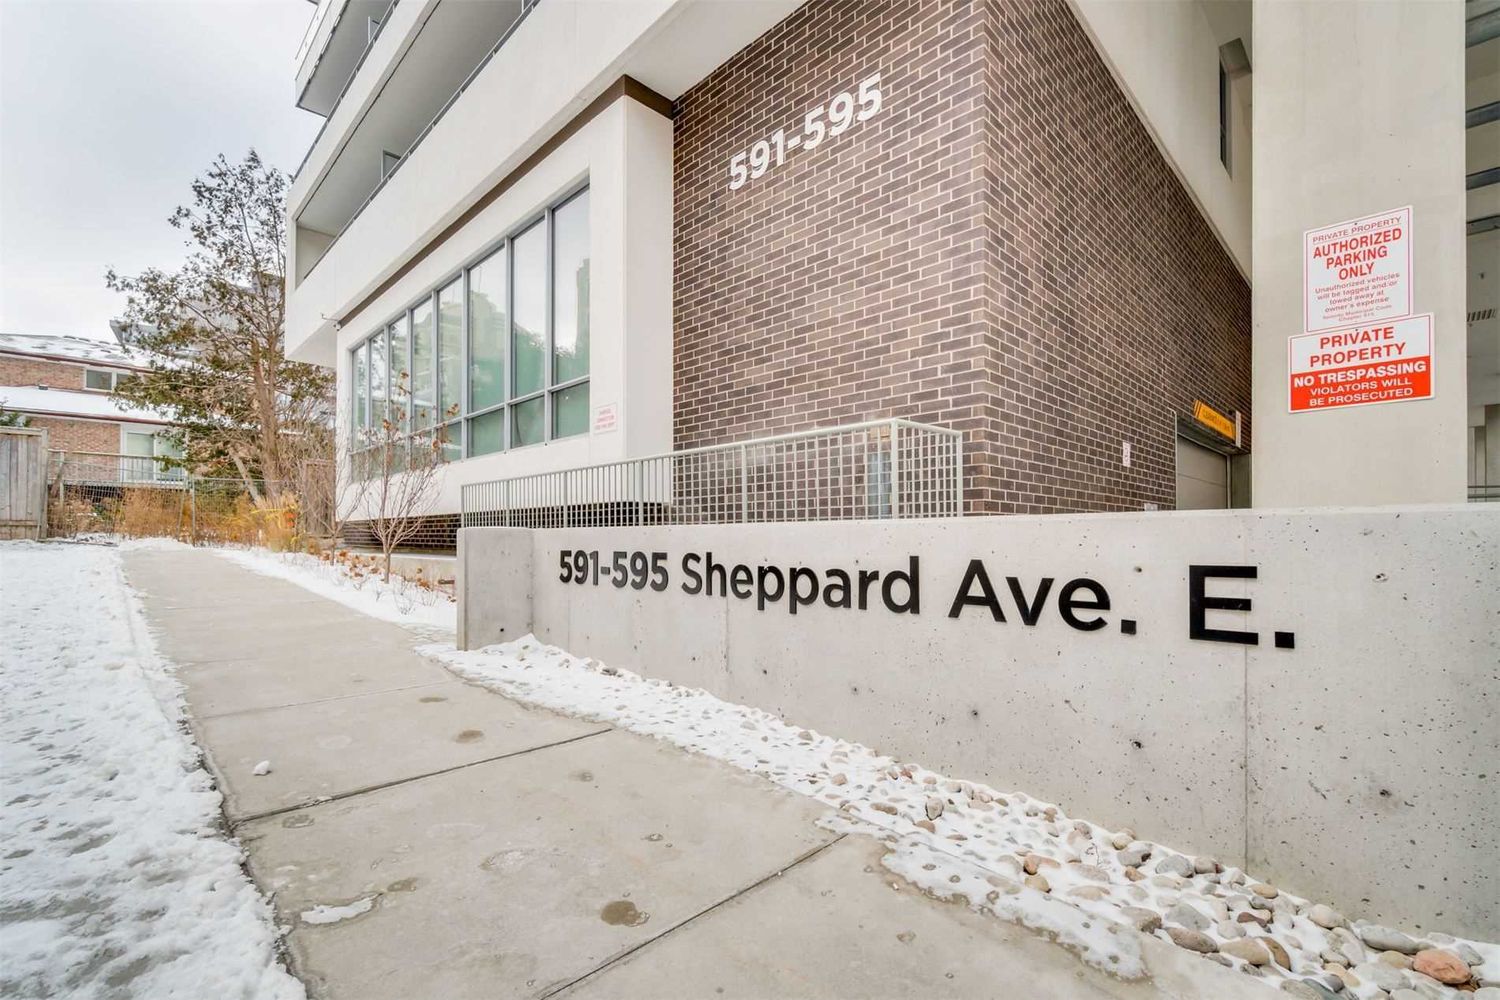 591 Sheppard Avenue E. The Village Residences is located in  North York, Toronto - image #2 of 2